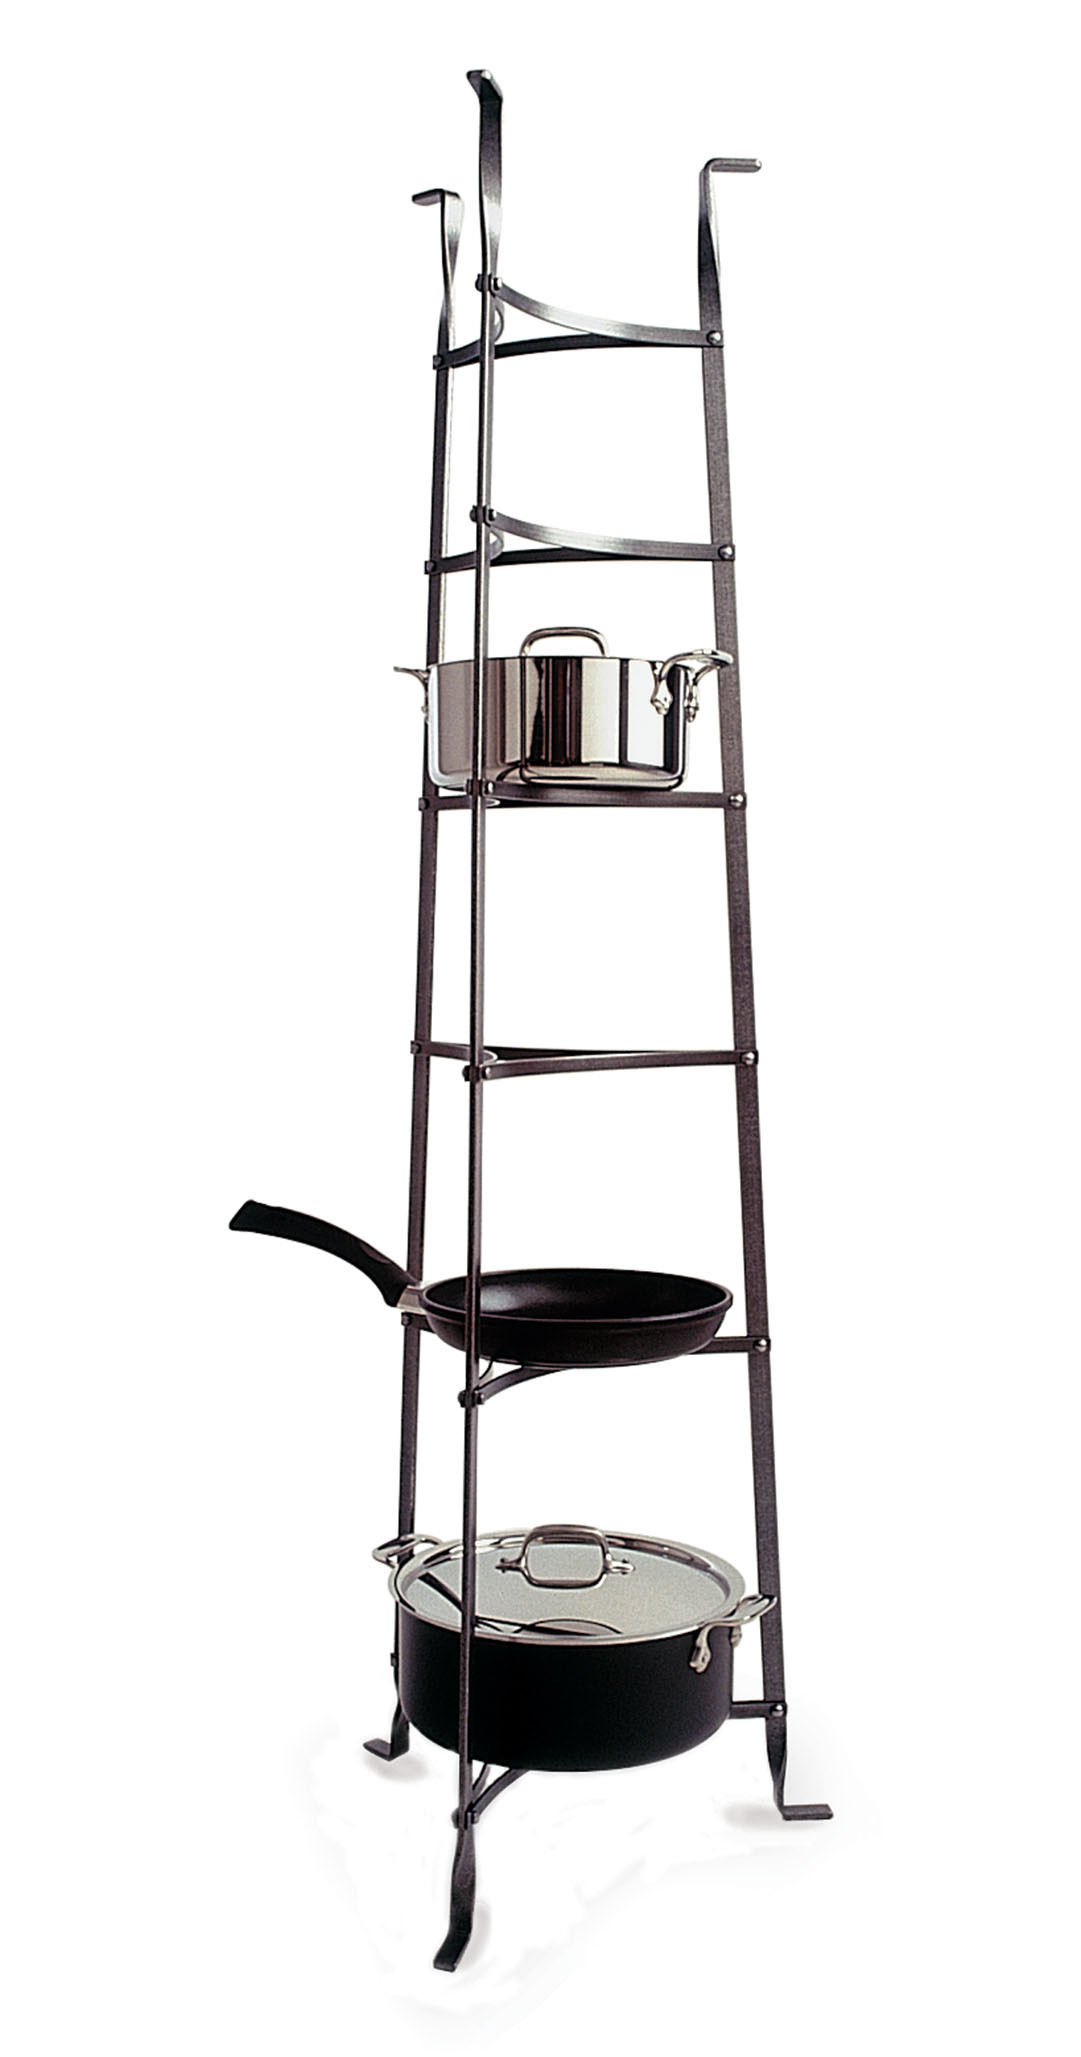 Enclume 6-Tier Cookware Stand in Hammered Steel